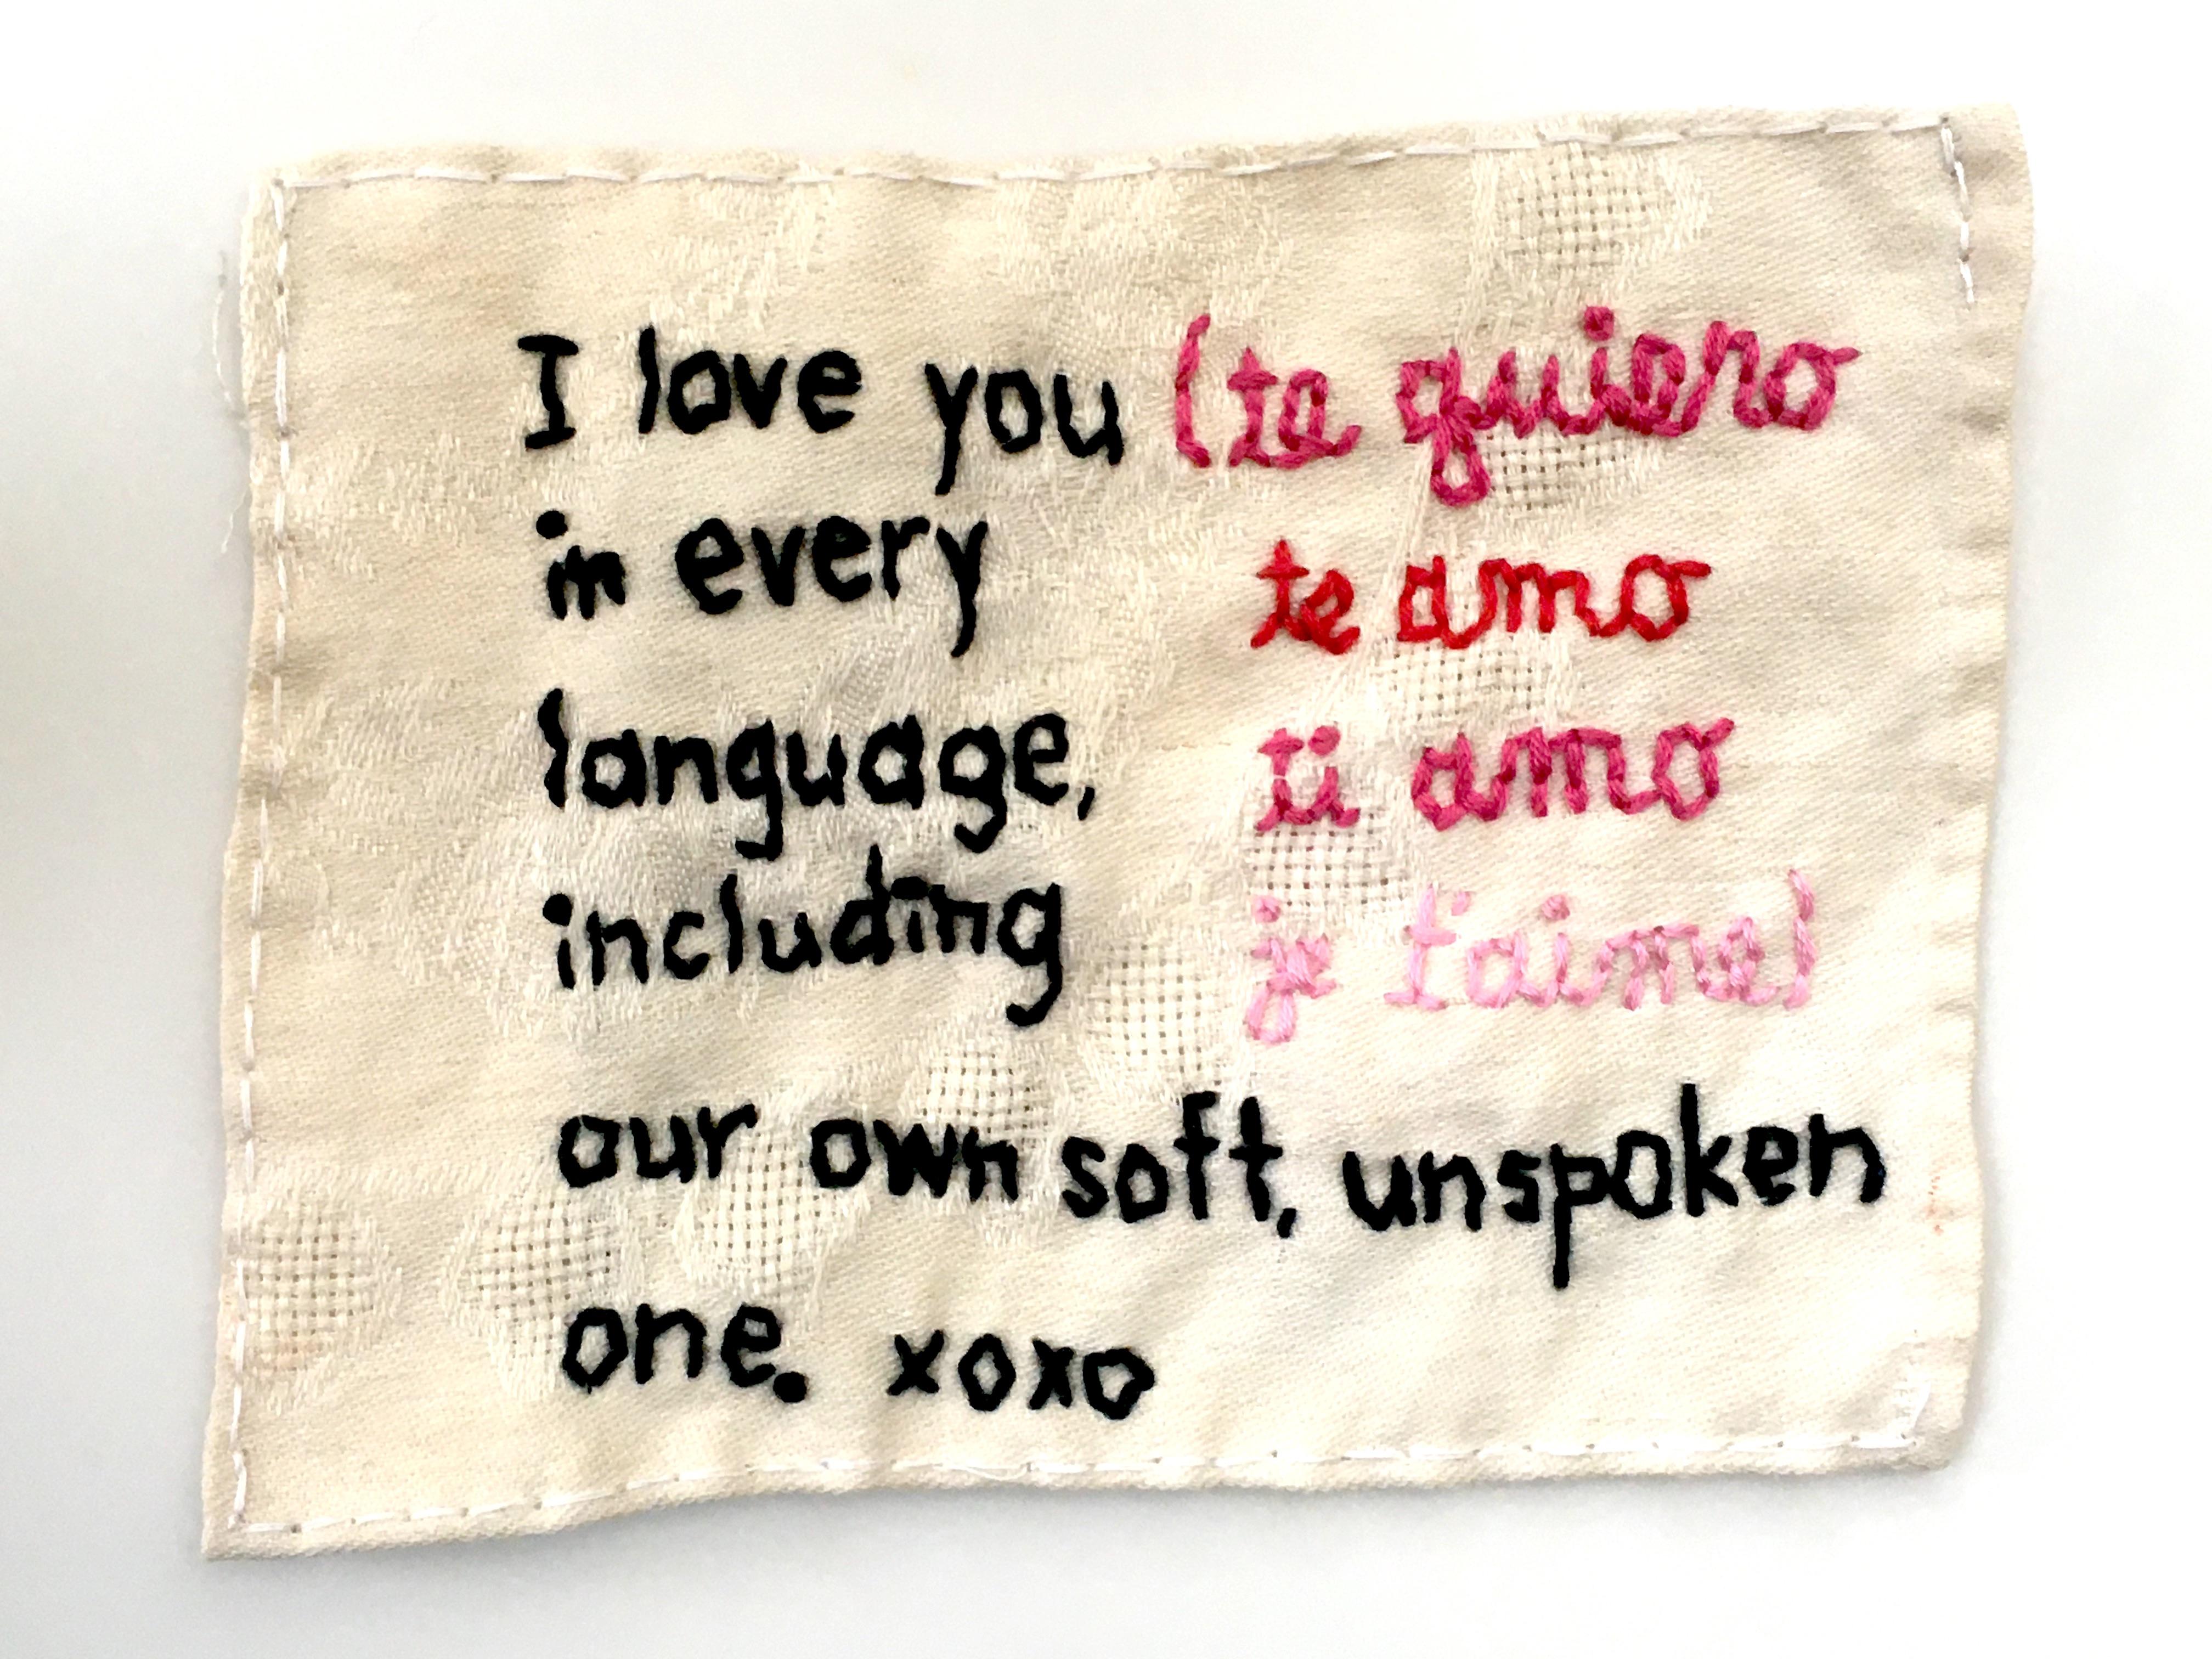 I Love You - love narrative embroidery black and pink on beige vintage fabric - Mixed Media Art by Iviva Olenick